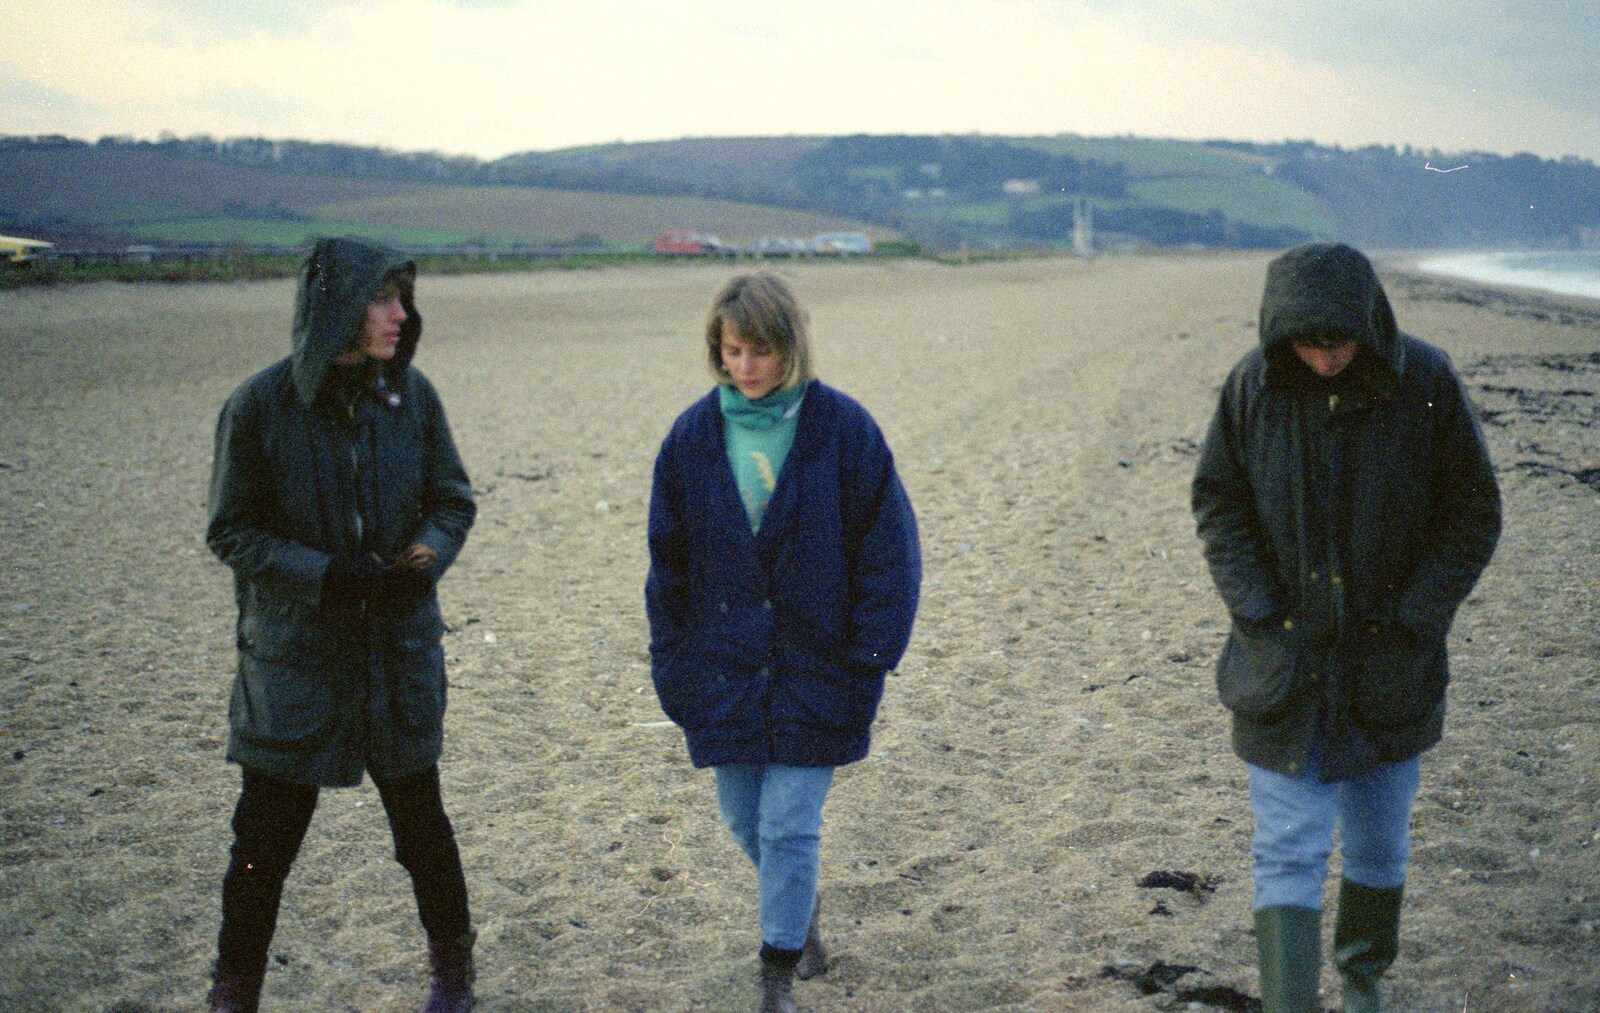 Jane, ? and Angela stride along the beach from Uni: Wembury and Slapton, Devon - 18th March 1989